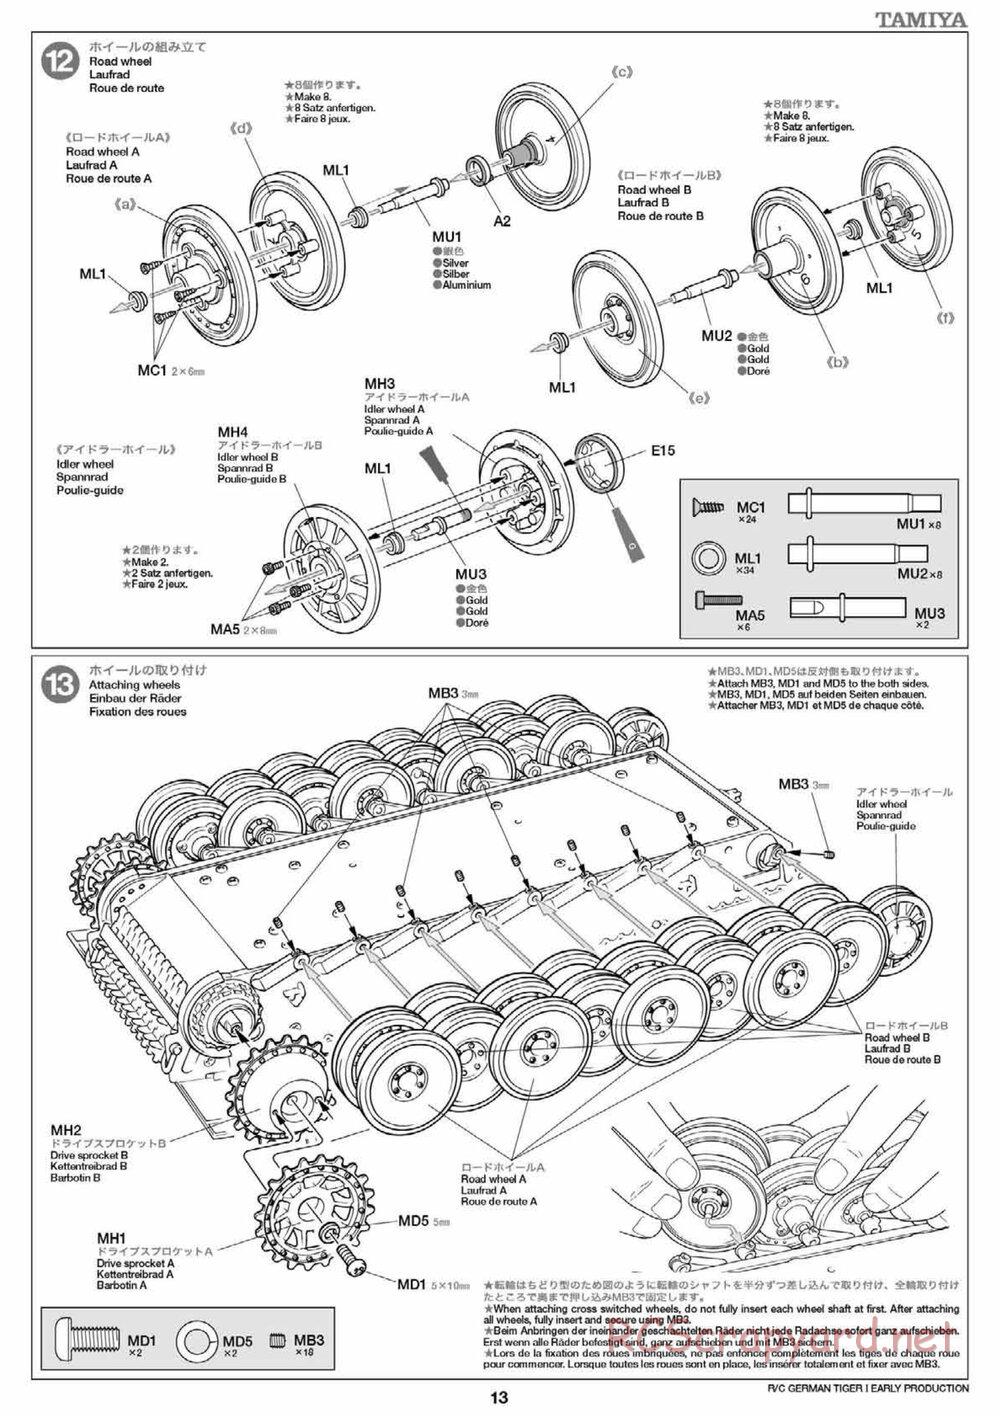 Tamiya - Tiger I Early Production - 1/16 Scale Chassis - Manual - Page 13